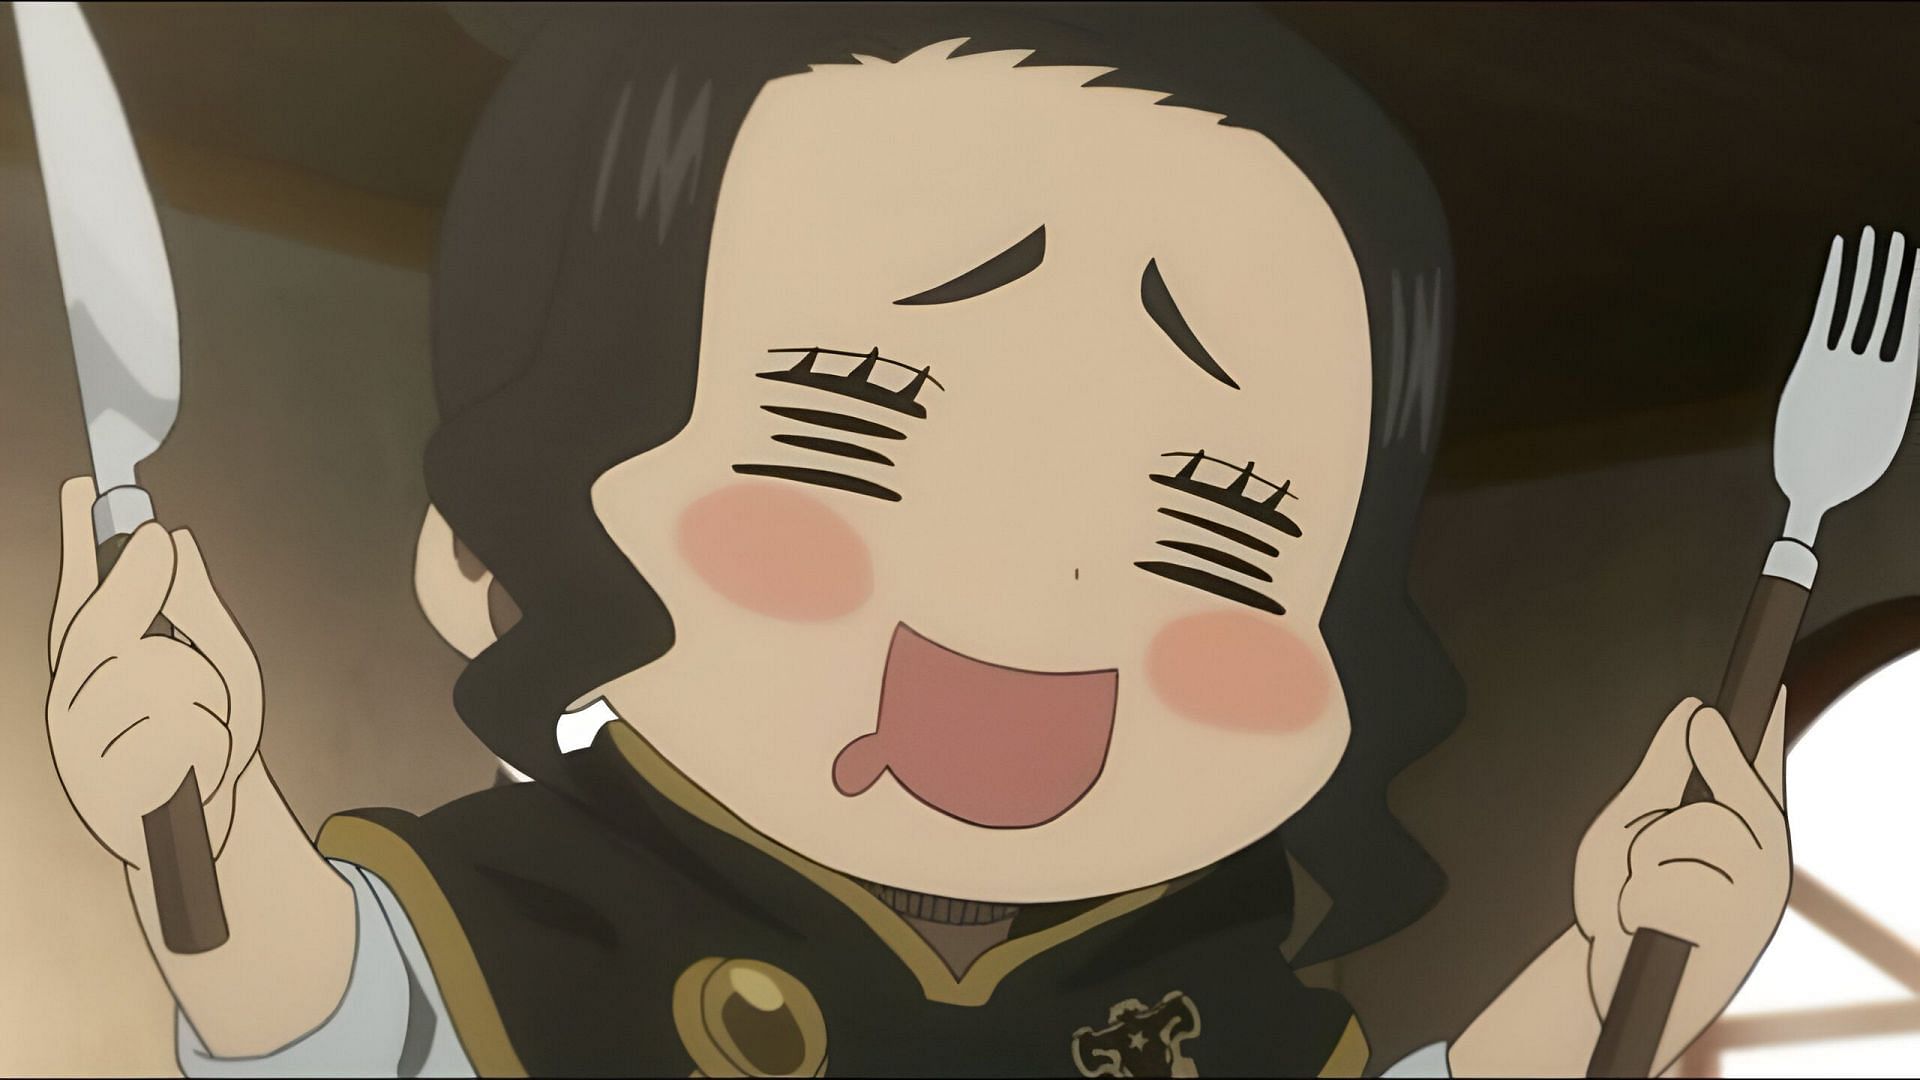 Charmy Pappitson as seen in the anime (Image via Studio Pierrot)